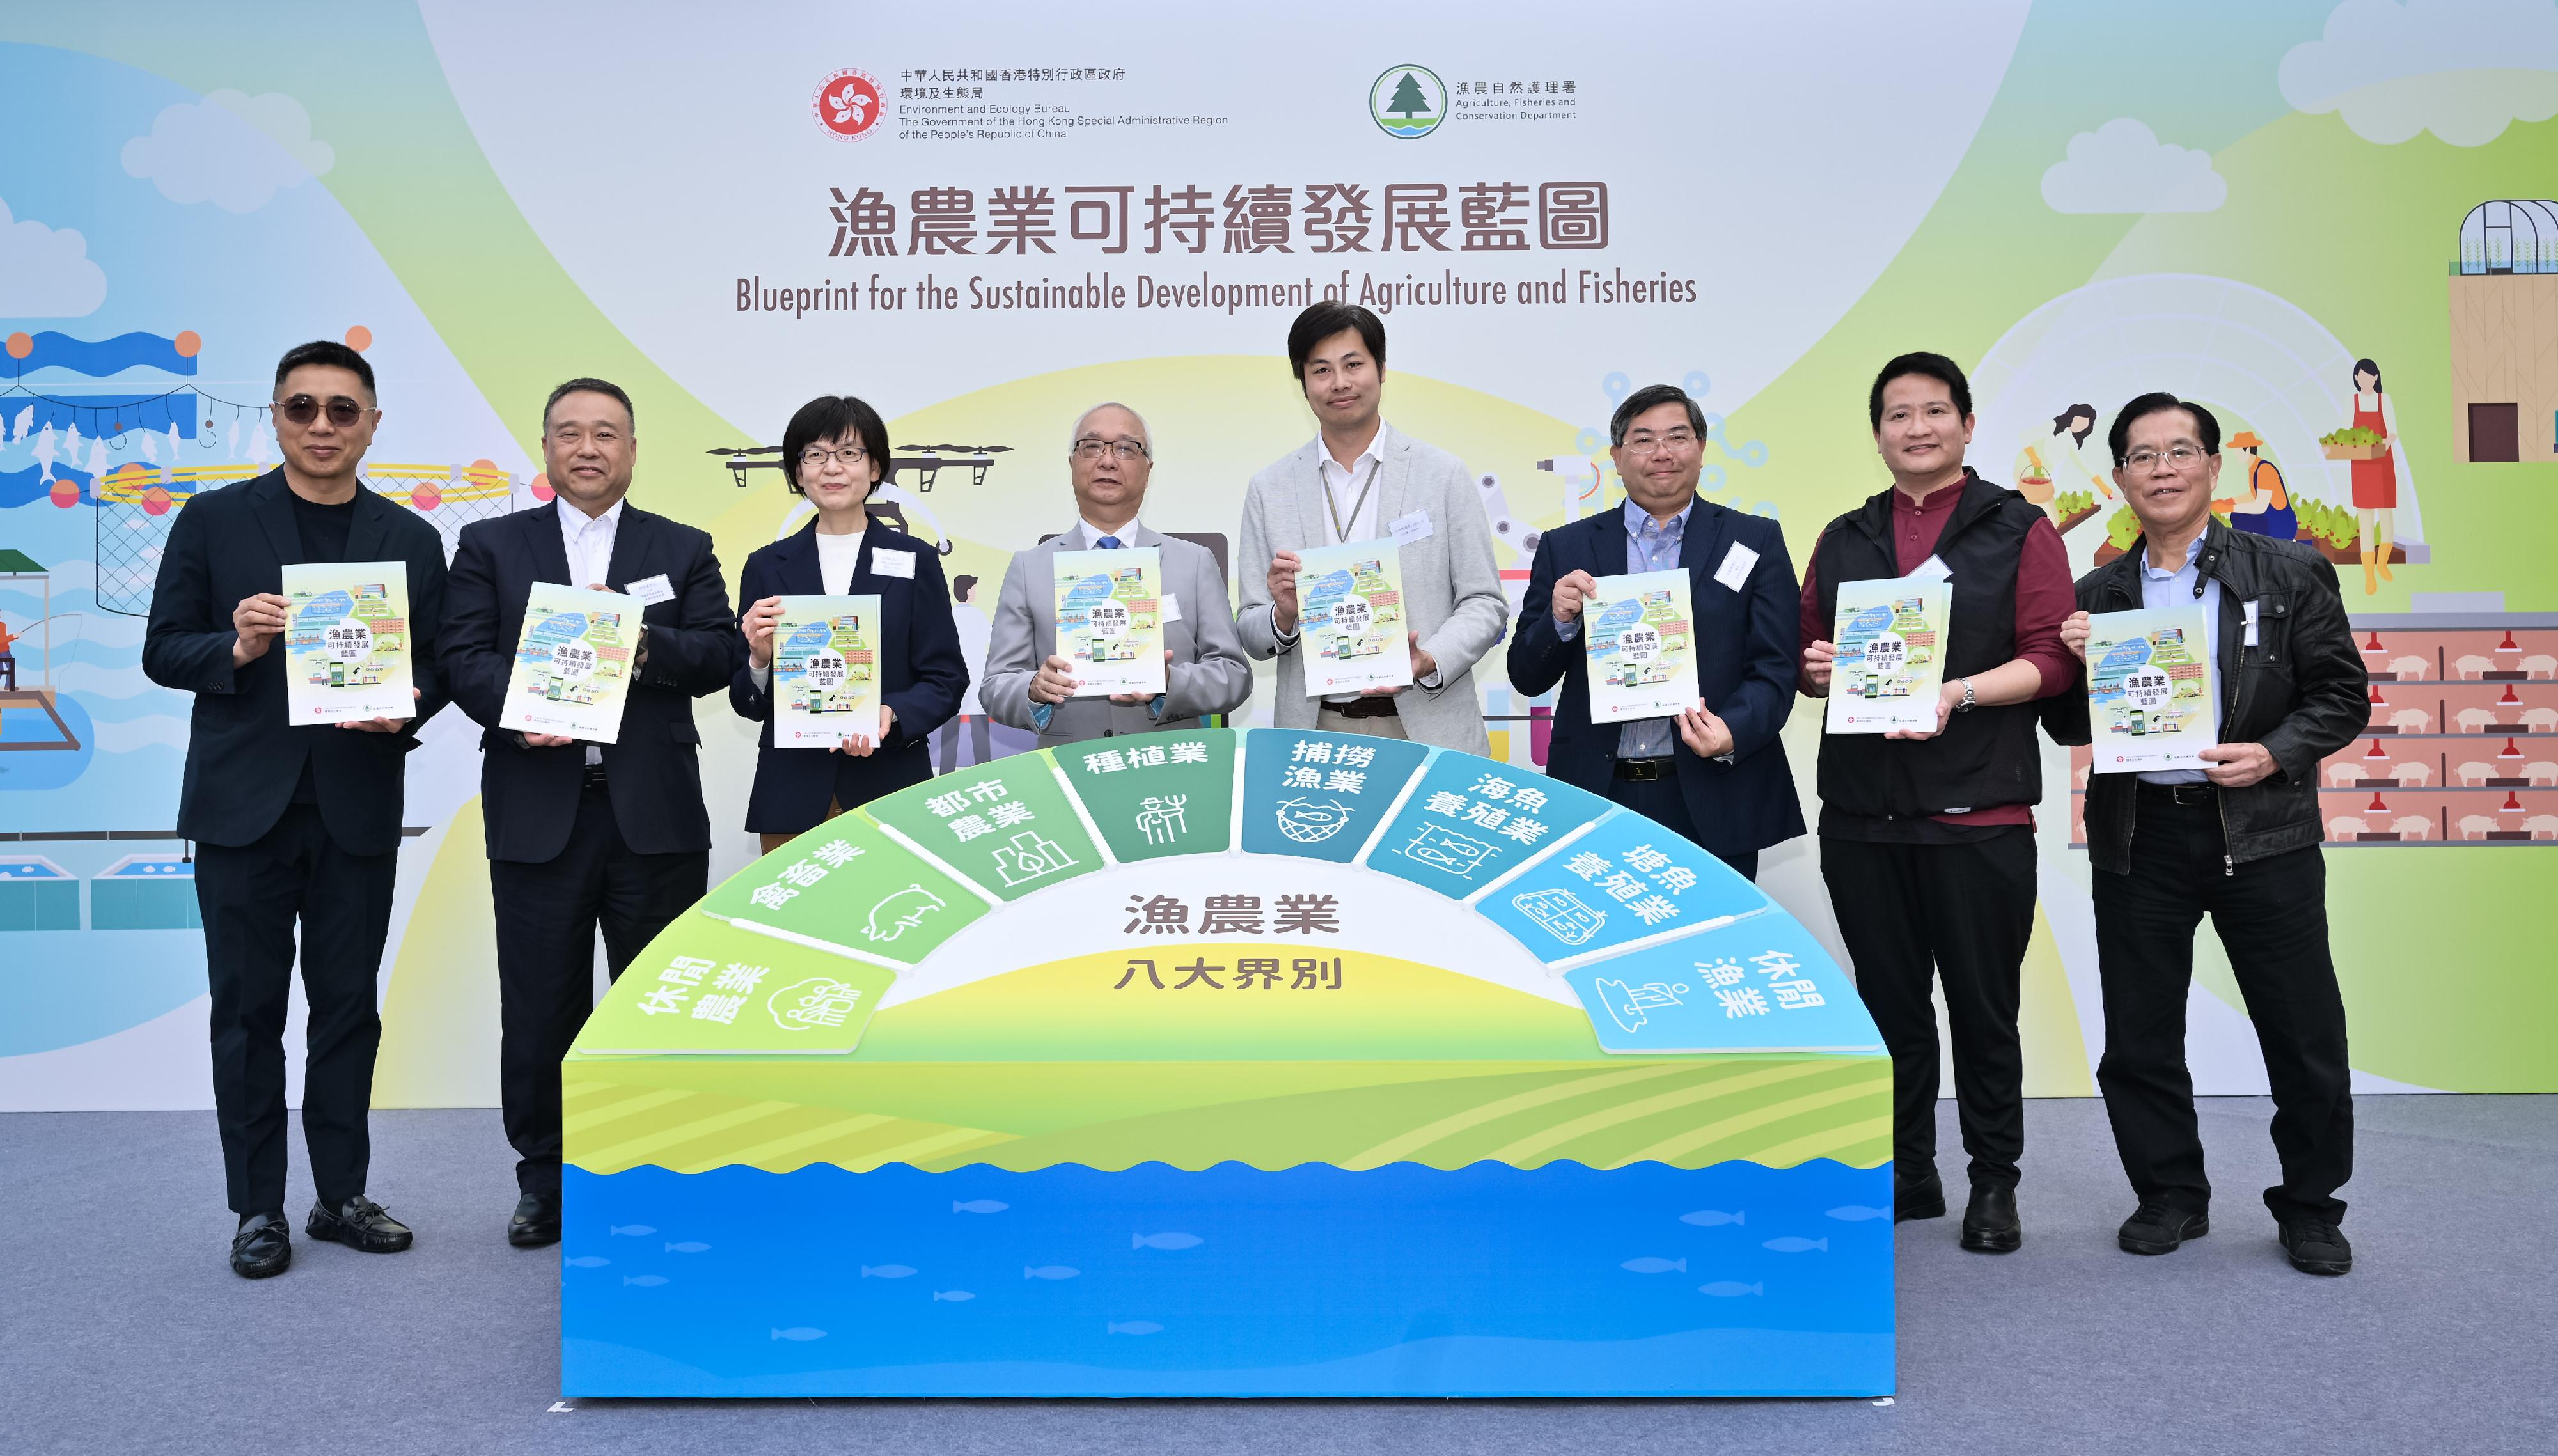 The Government today (December 14) released the Blueprint for the Sustainable Development of Agriculture and Fisheries. Picture shows the Secretary for Environment and Ecology, Mr Tse Chin-wan (fourth left); the Permanent Secretary for Environment and Ecology (Food), Miss Vivian Lau (third left); the Director of Agriculture, Fisheries and Conservation, Dr Leung Siu-fai (third right); the Legislative Council Member Mr Steven Ho (fourth right); the Chairman of the Advisory Committee on Agriculture and Fisheries, Mr Anthony Lam (second left), and other guests officiating at the launching ceremony. 